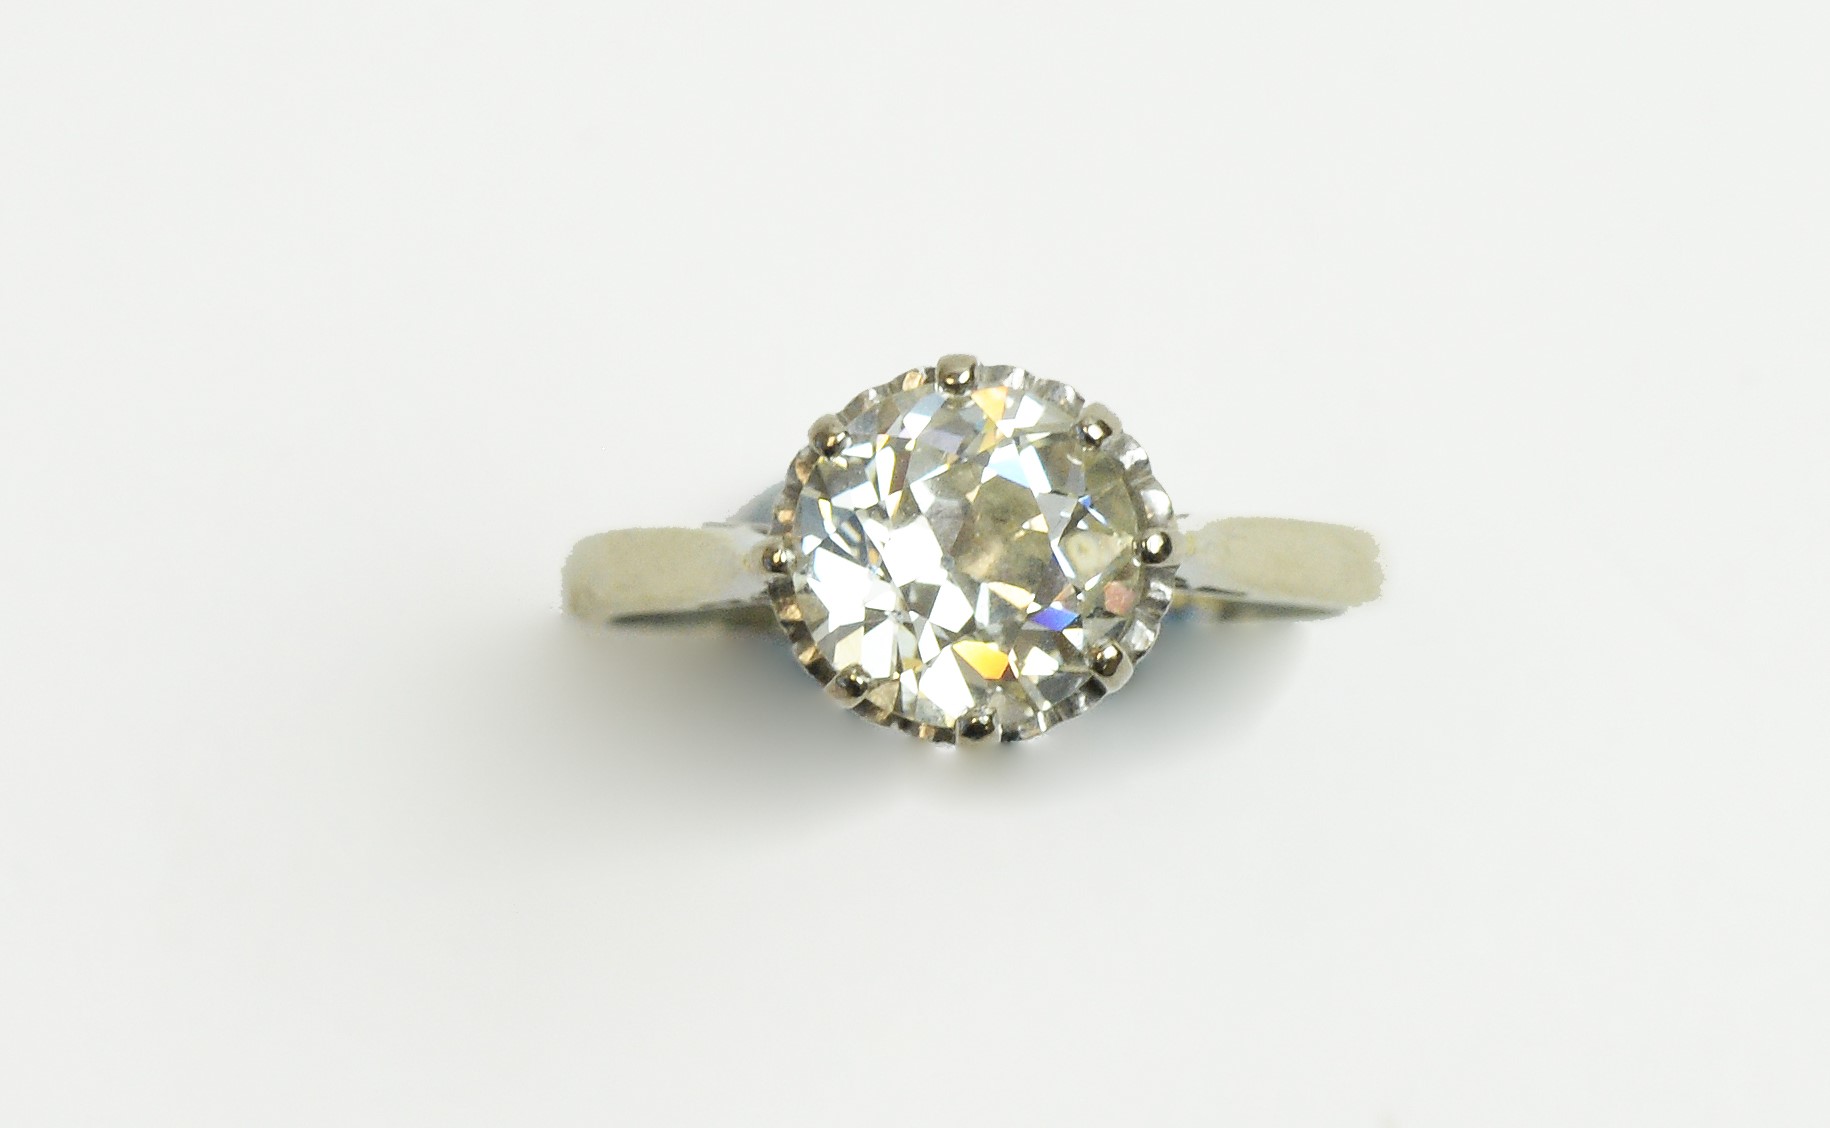 Solitaire diamond ring - Image 2 of 4